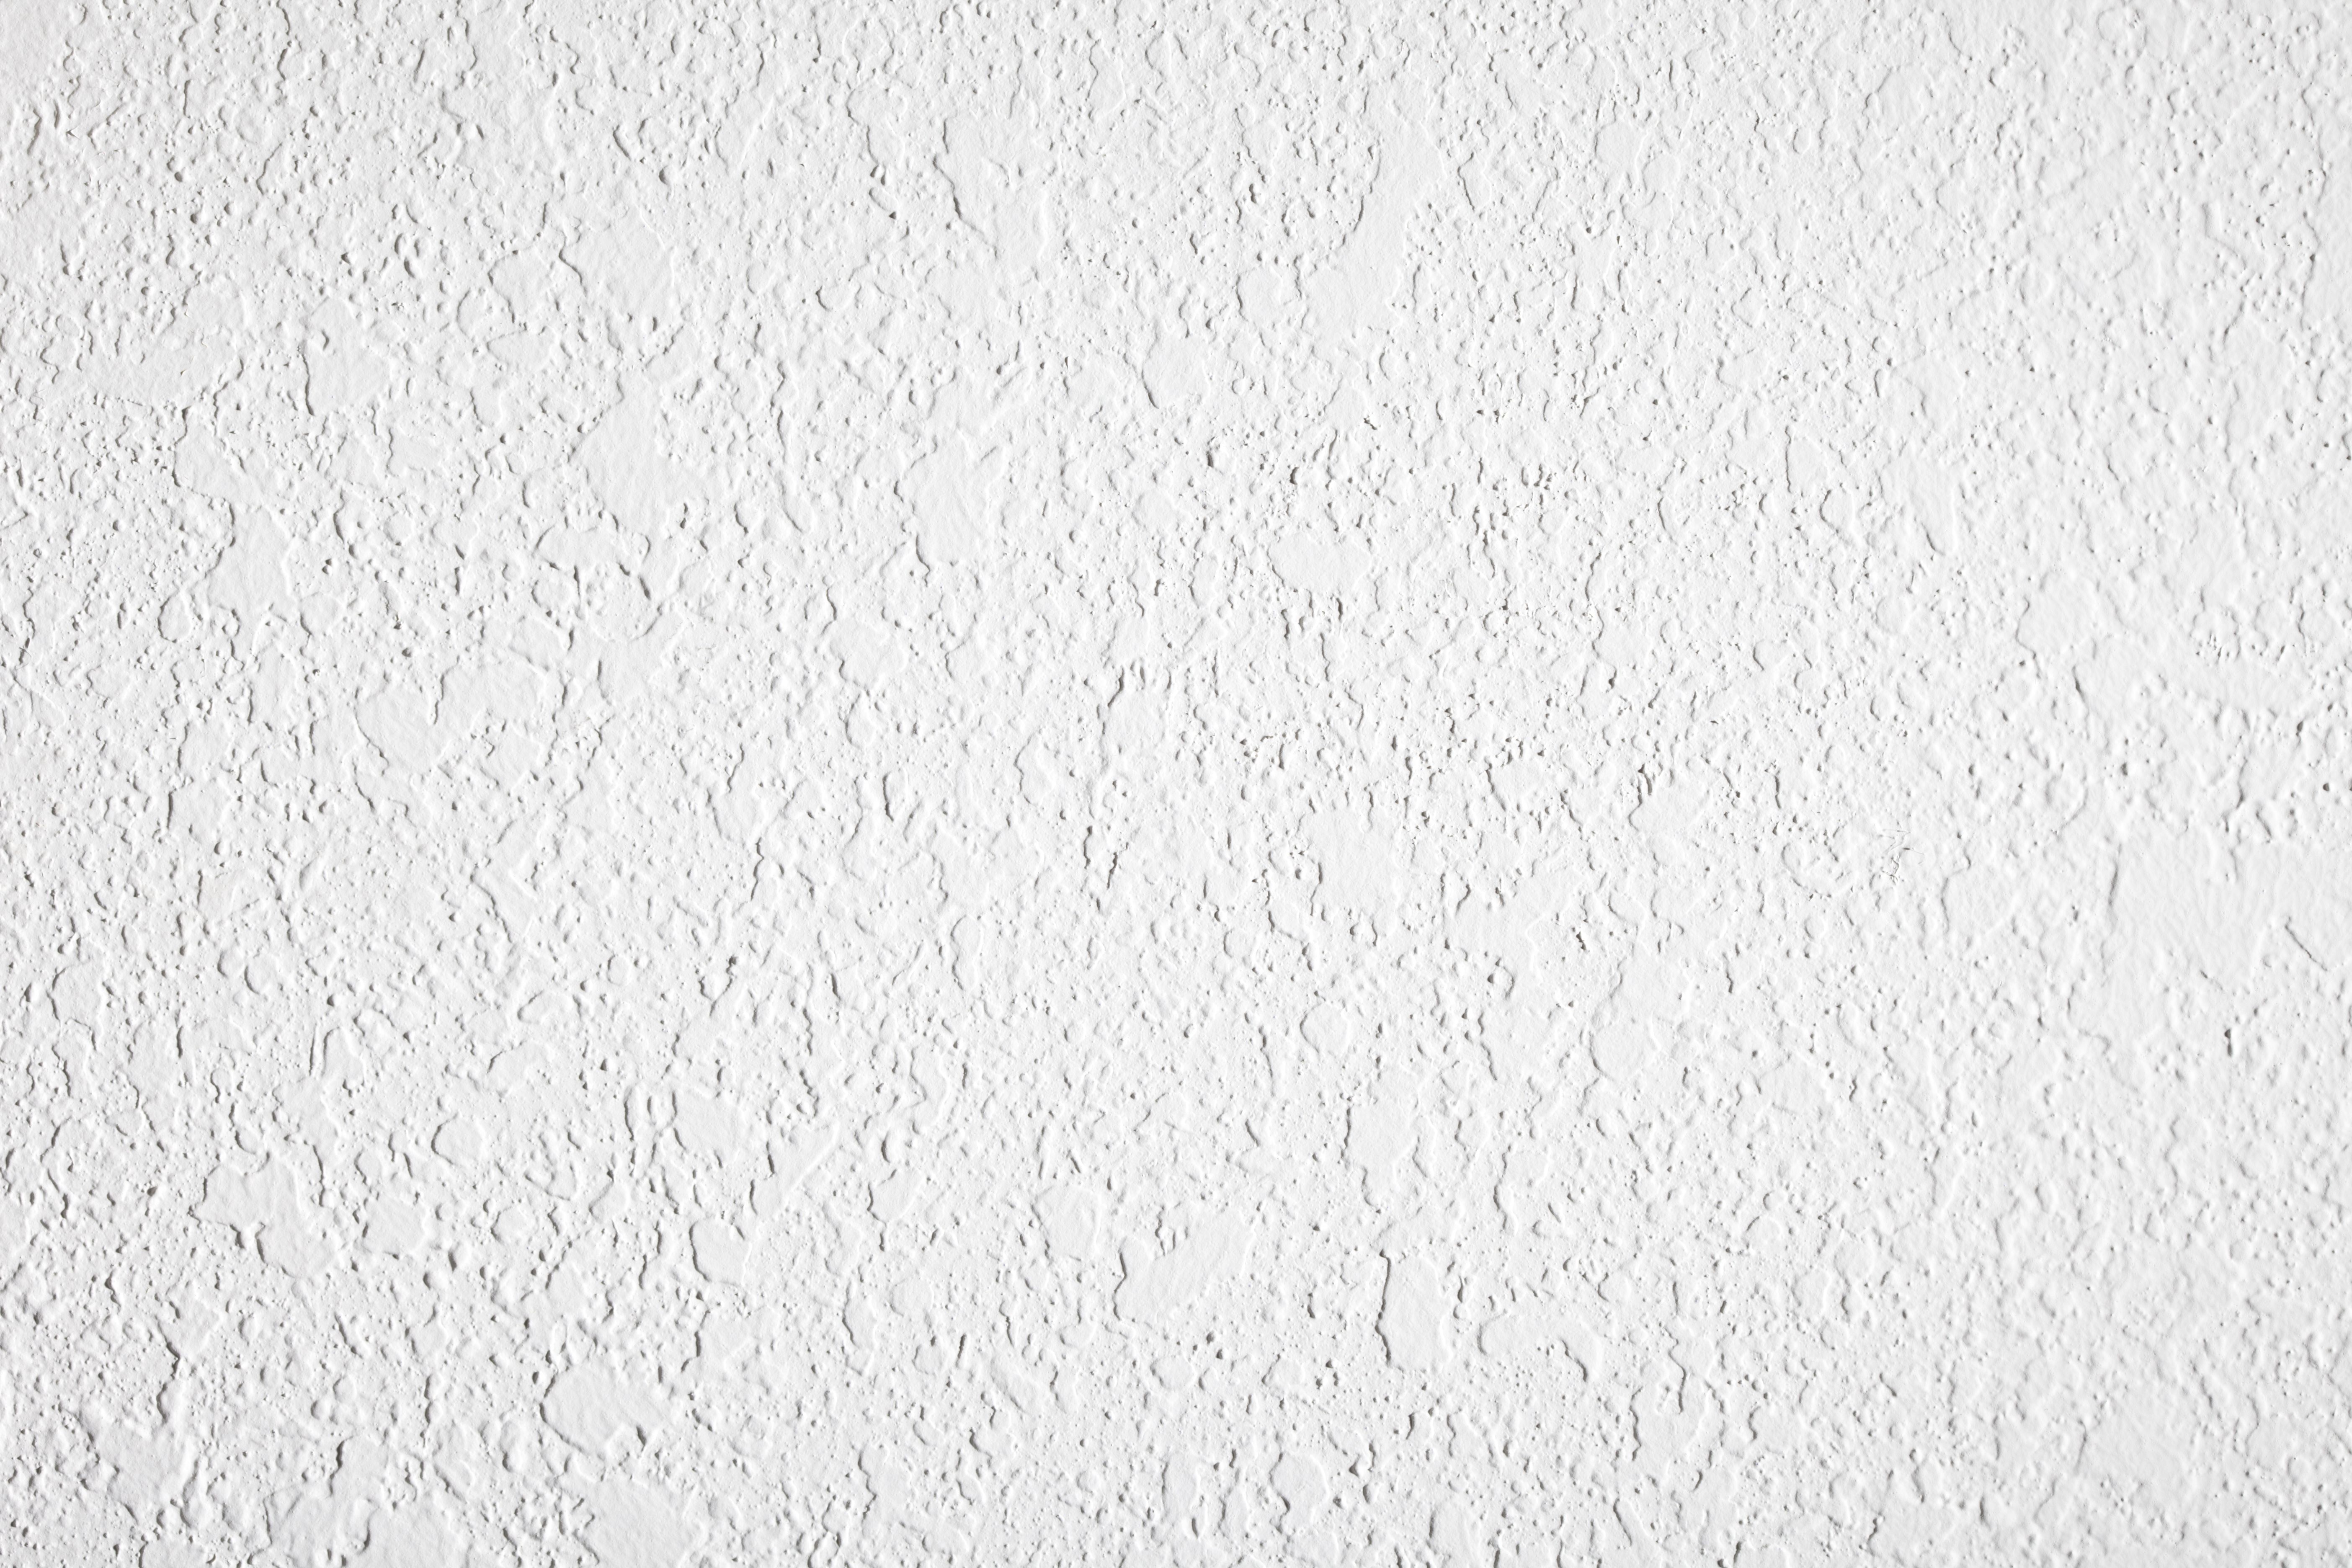 high contrast textured white plaster wall 157564036 5893cb0c5f9b5874ee2d79f1